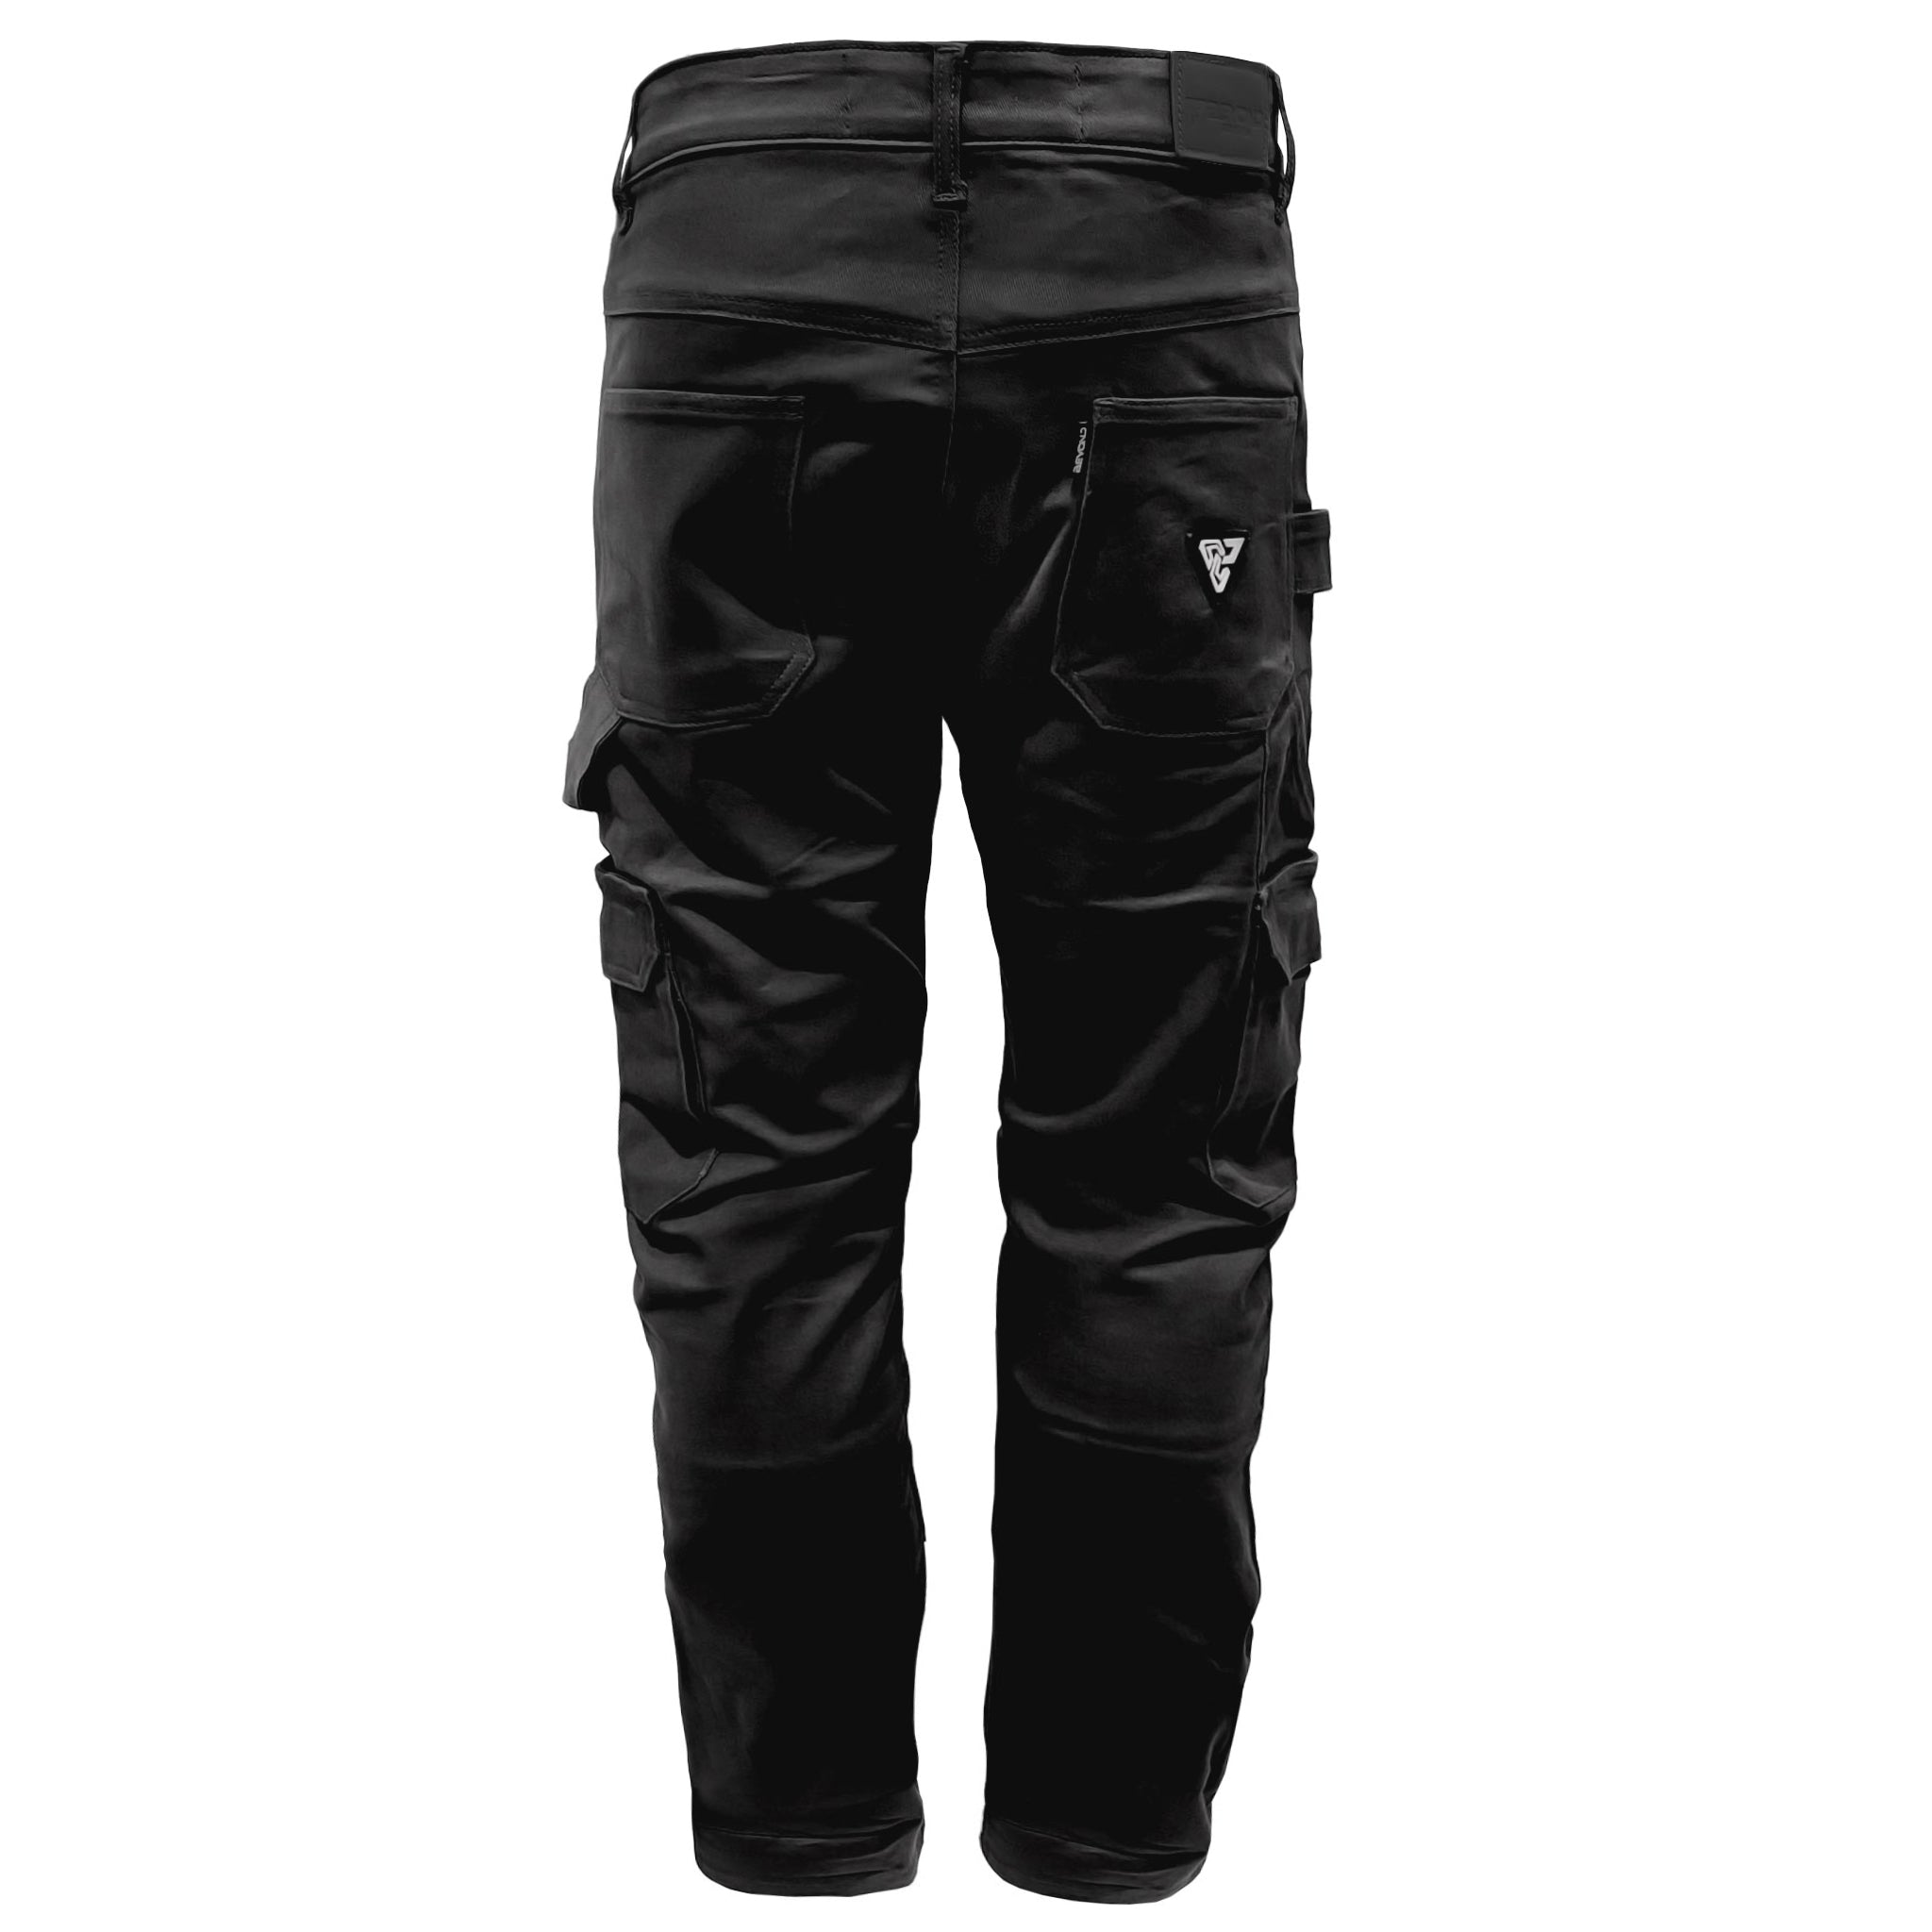 Loose Fit Cargo Pants - Black with Pads 46 / 36 / Black